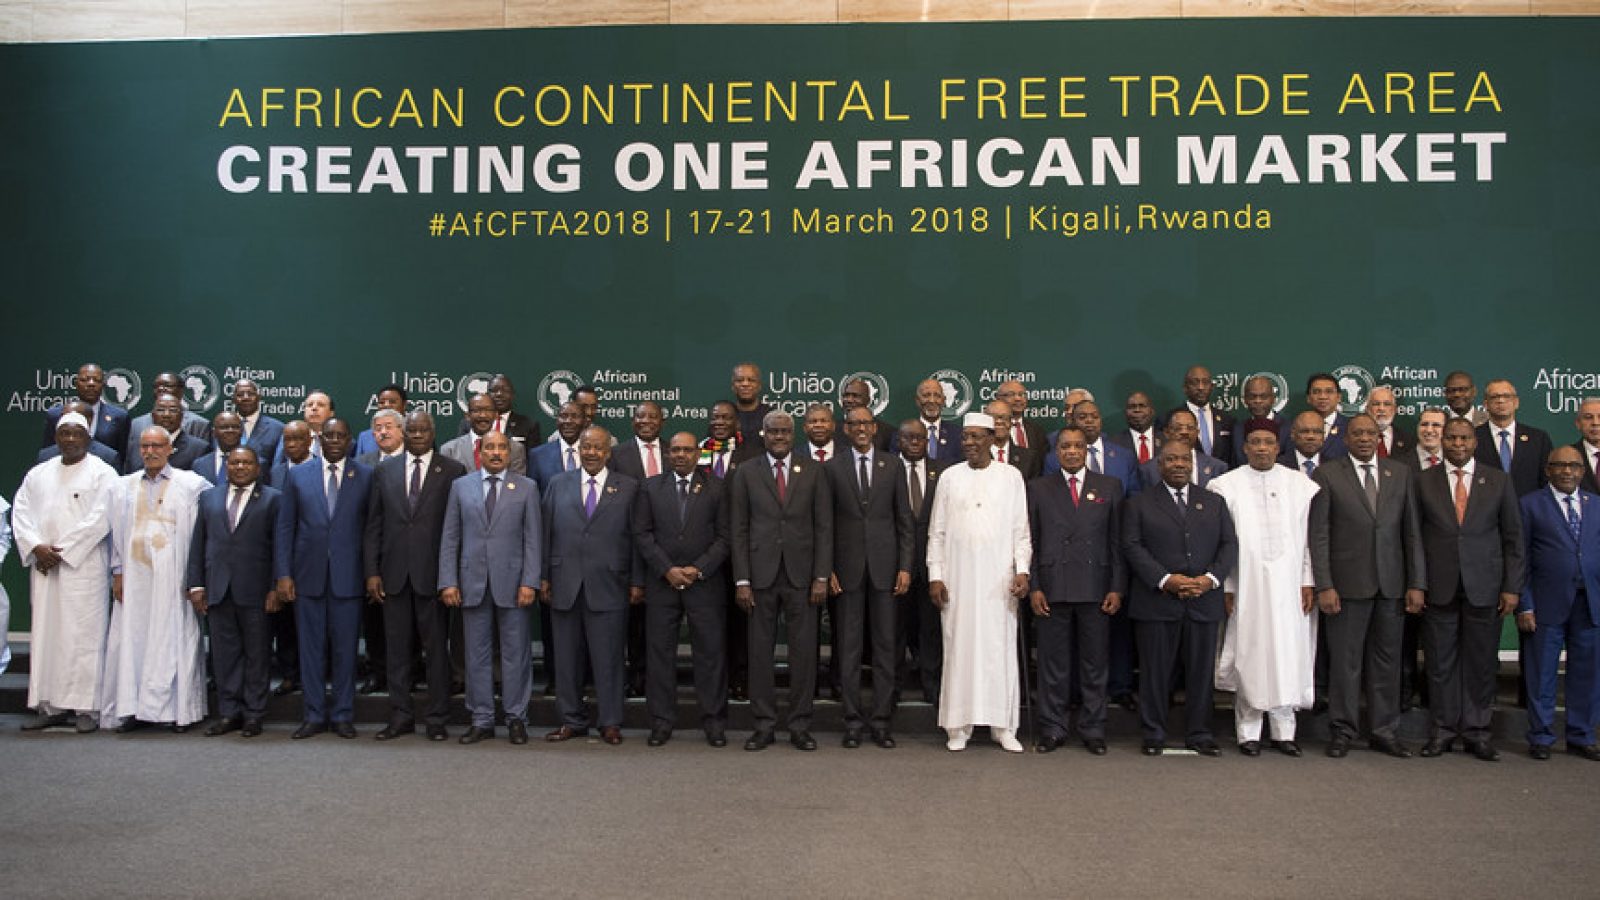 10th Extraordinary Summit of the African Union